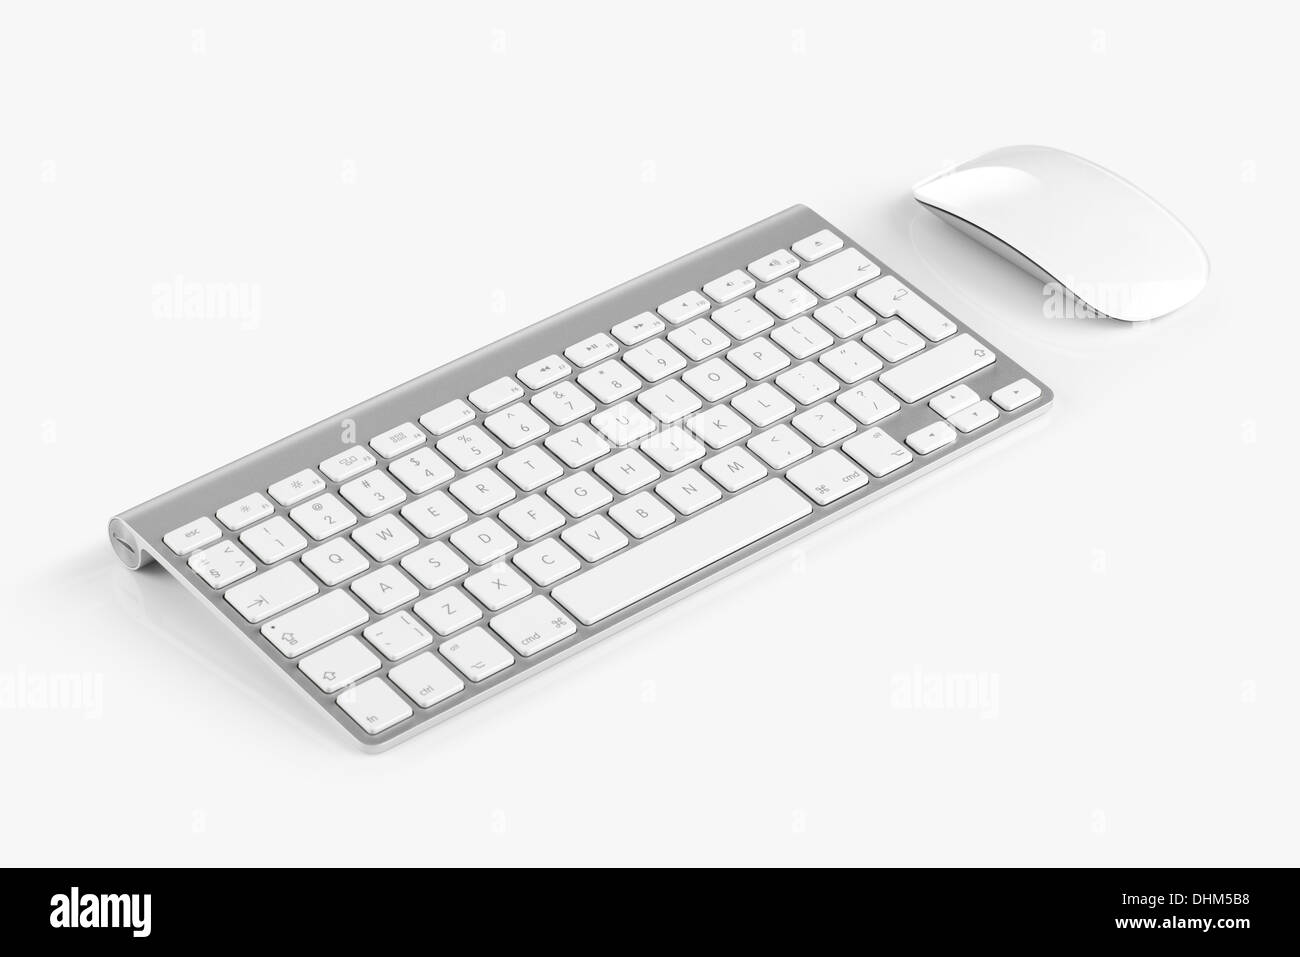 Wireless computer keyboard with the English alphabet and mouse are isolated on white background Stock Photo